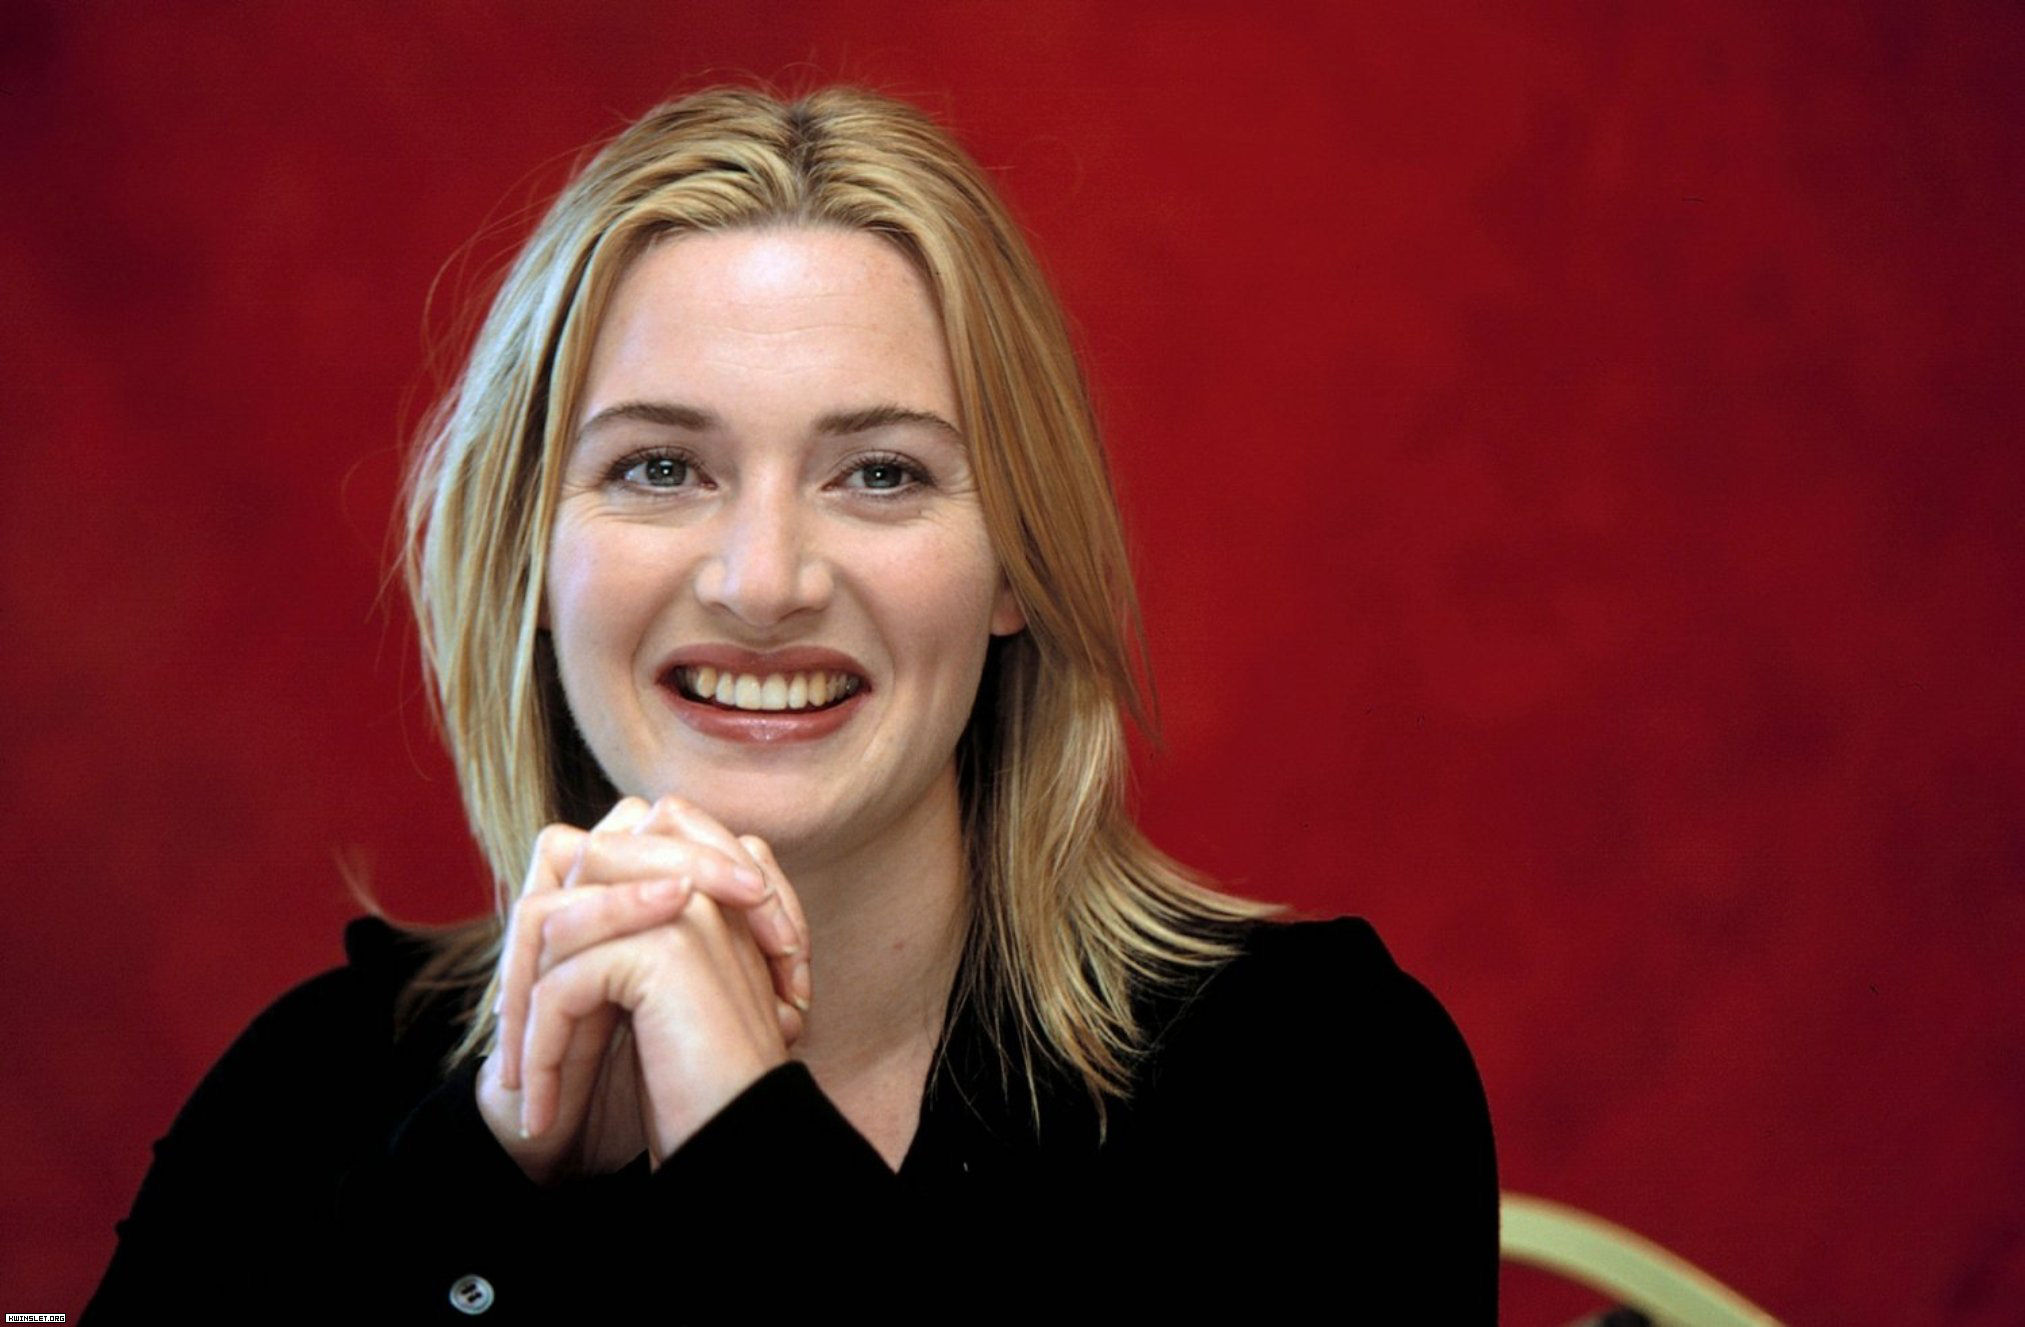 Kate Winslet Smile Images Wallpaper, HD Celebrities 4K Wallpapers, Images,  Photos and Background - Wallpapers Den